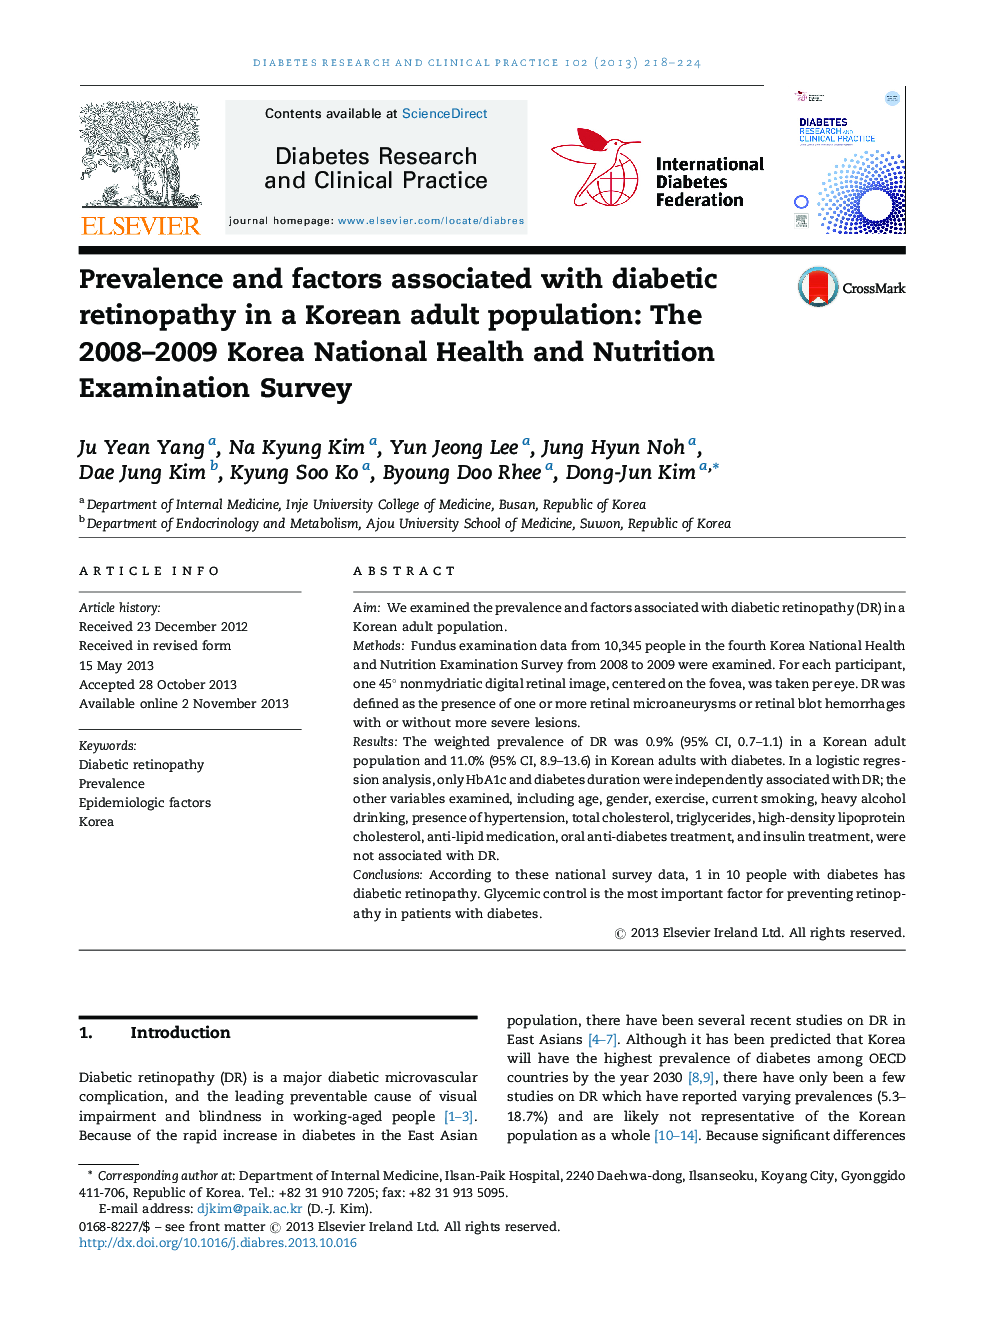 Prevalence and factors associated with diabetic retinopathy in a Korean adult population: The 2008–2009 Korea National Health and Nutrition Examination Survey